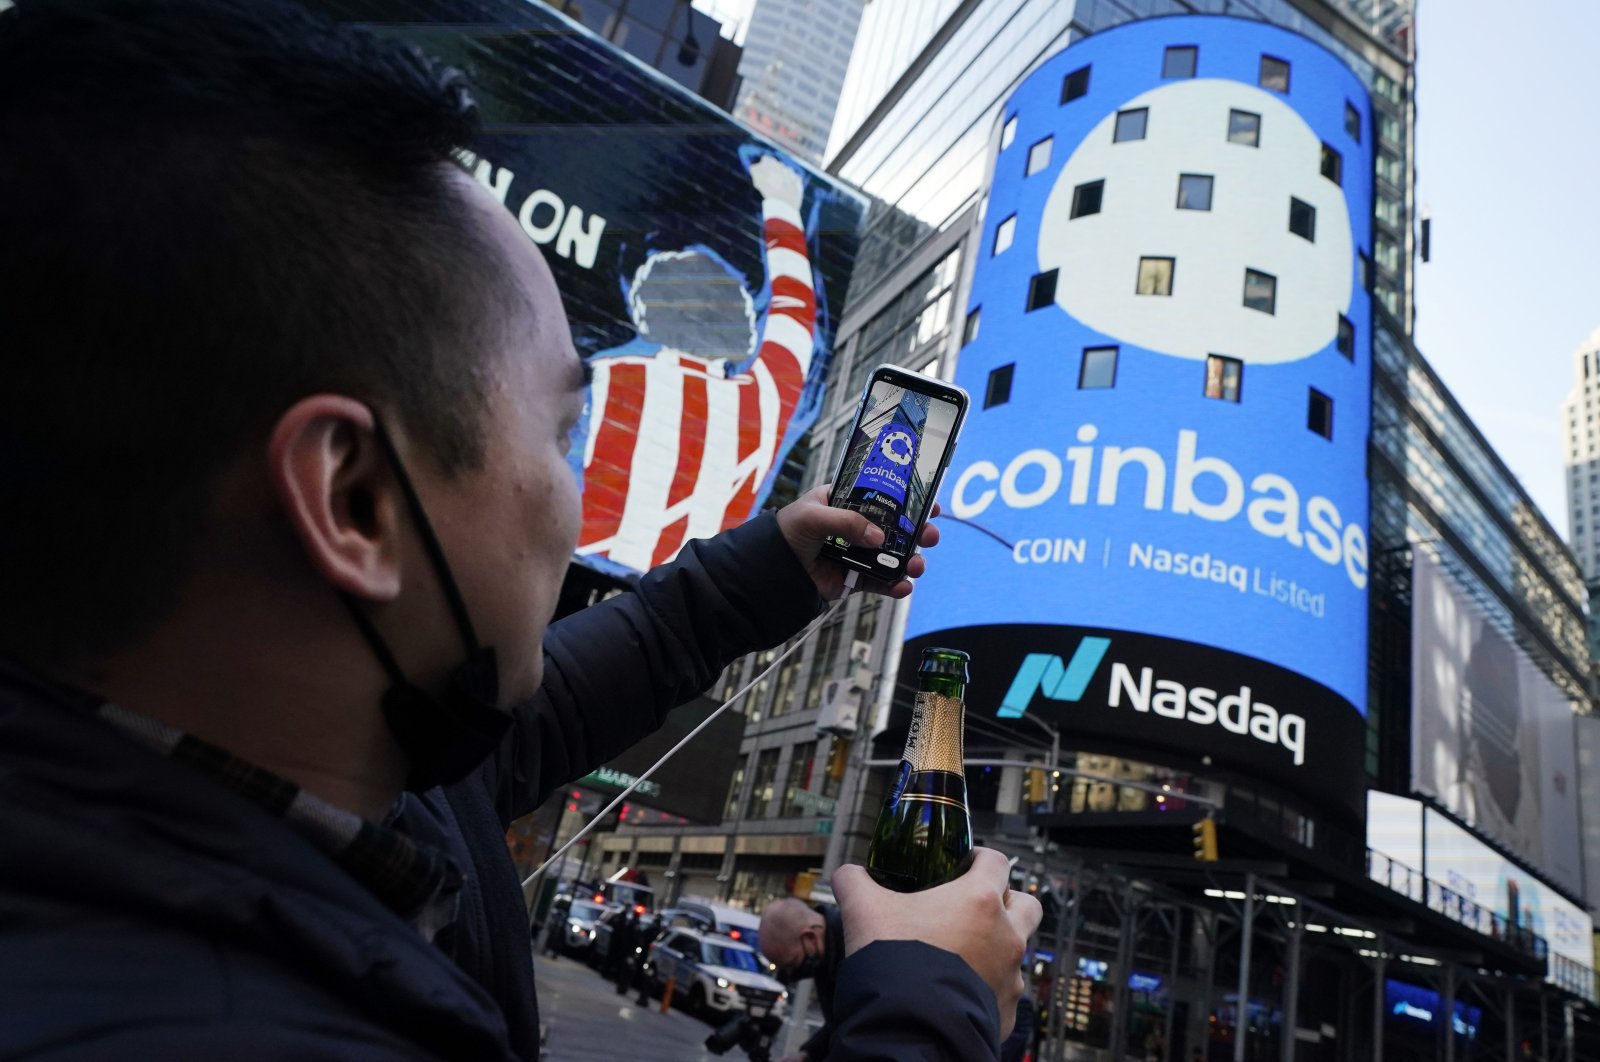 Coinbase makes market debut with $100 billion valuation ...